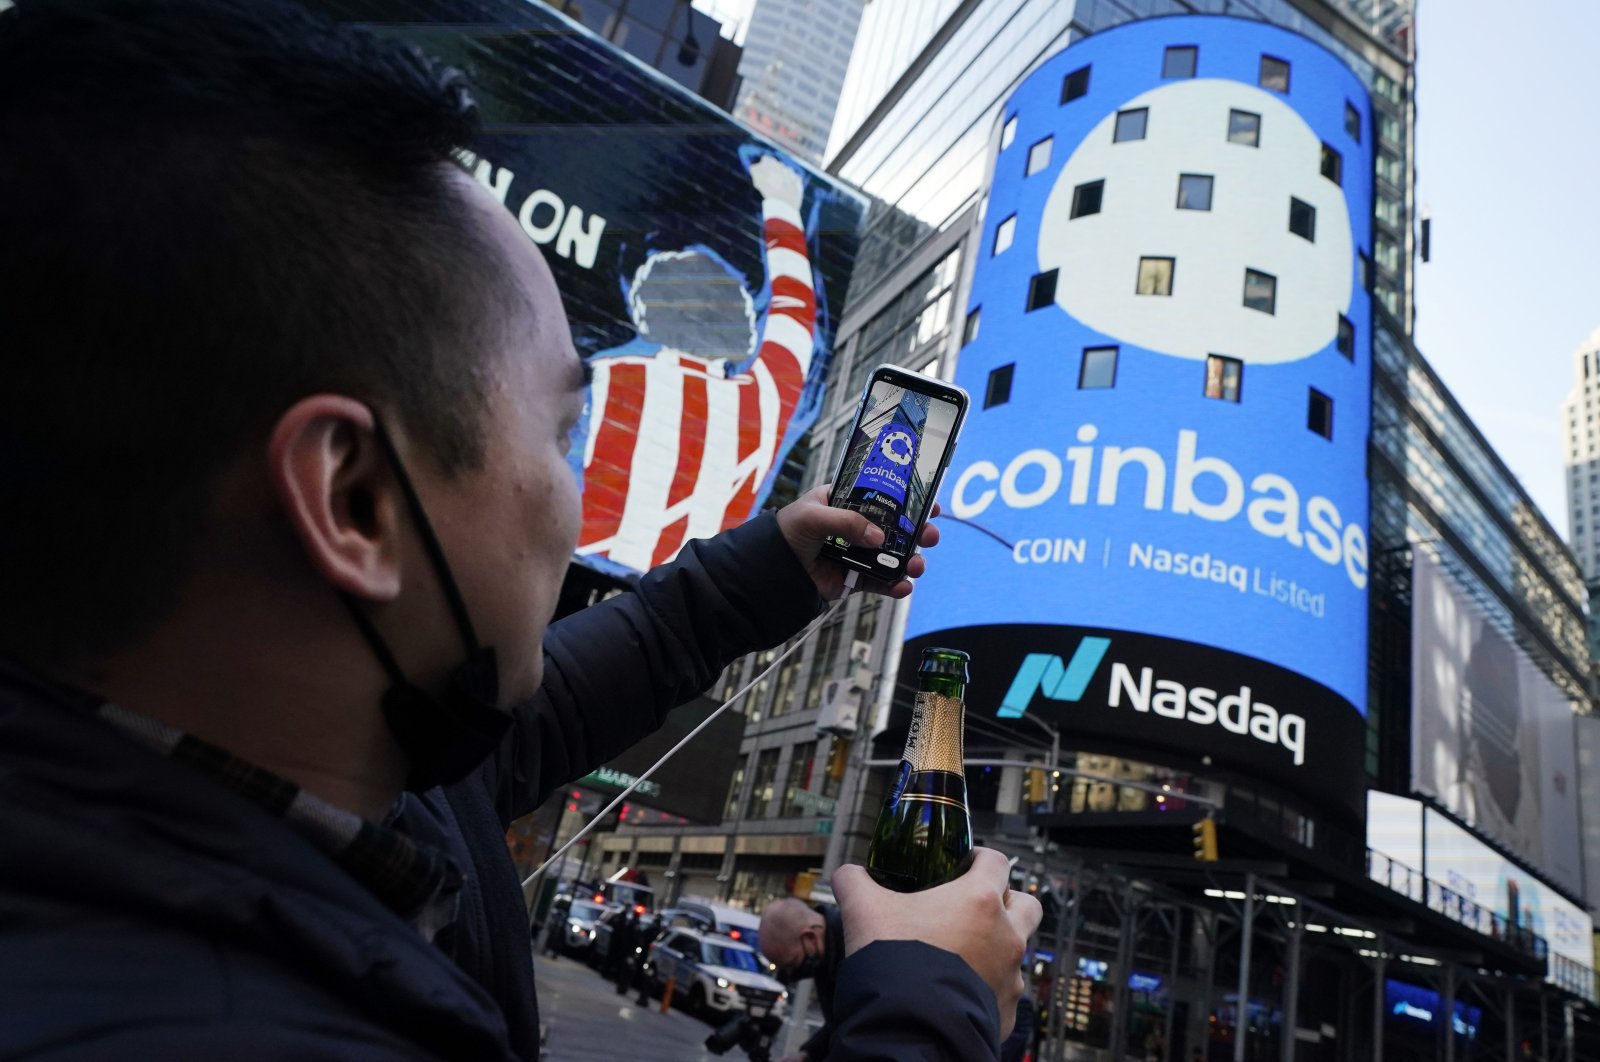 Coinbase makes market debut with $100 billion valuation ...